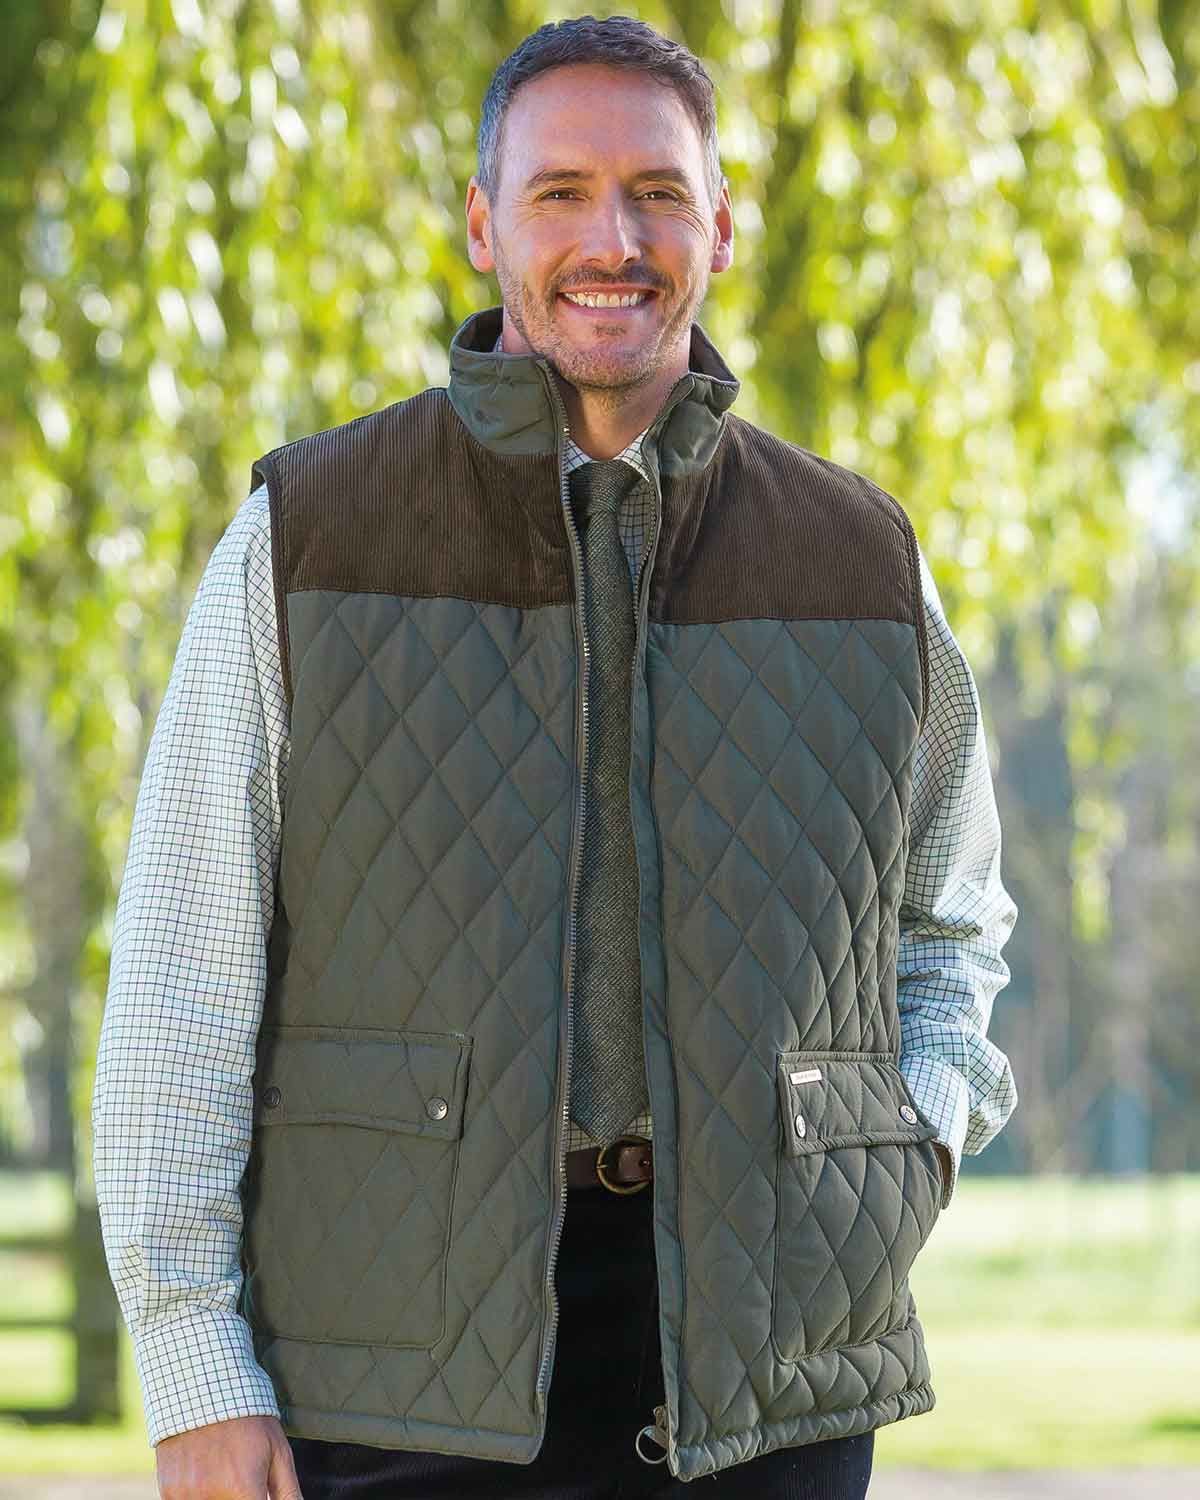 Quilted body warmer - navy